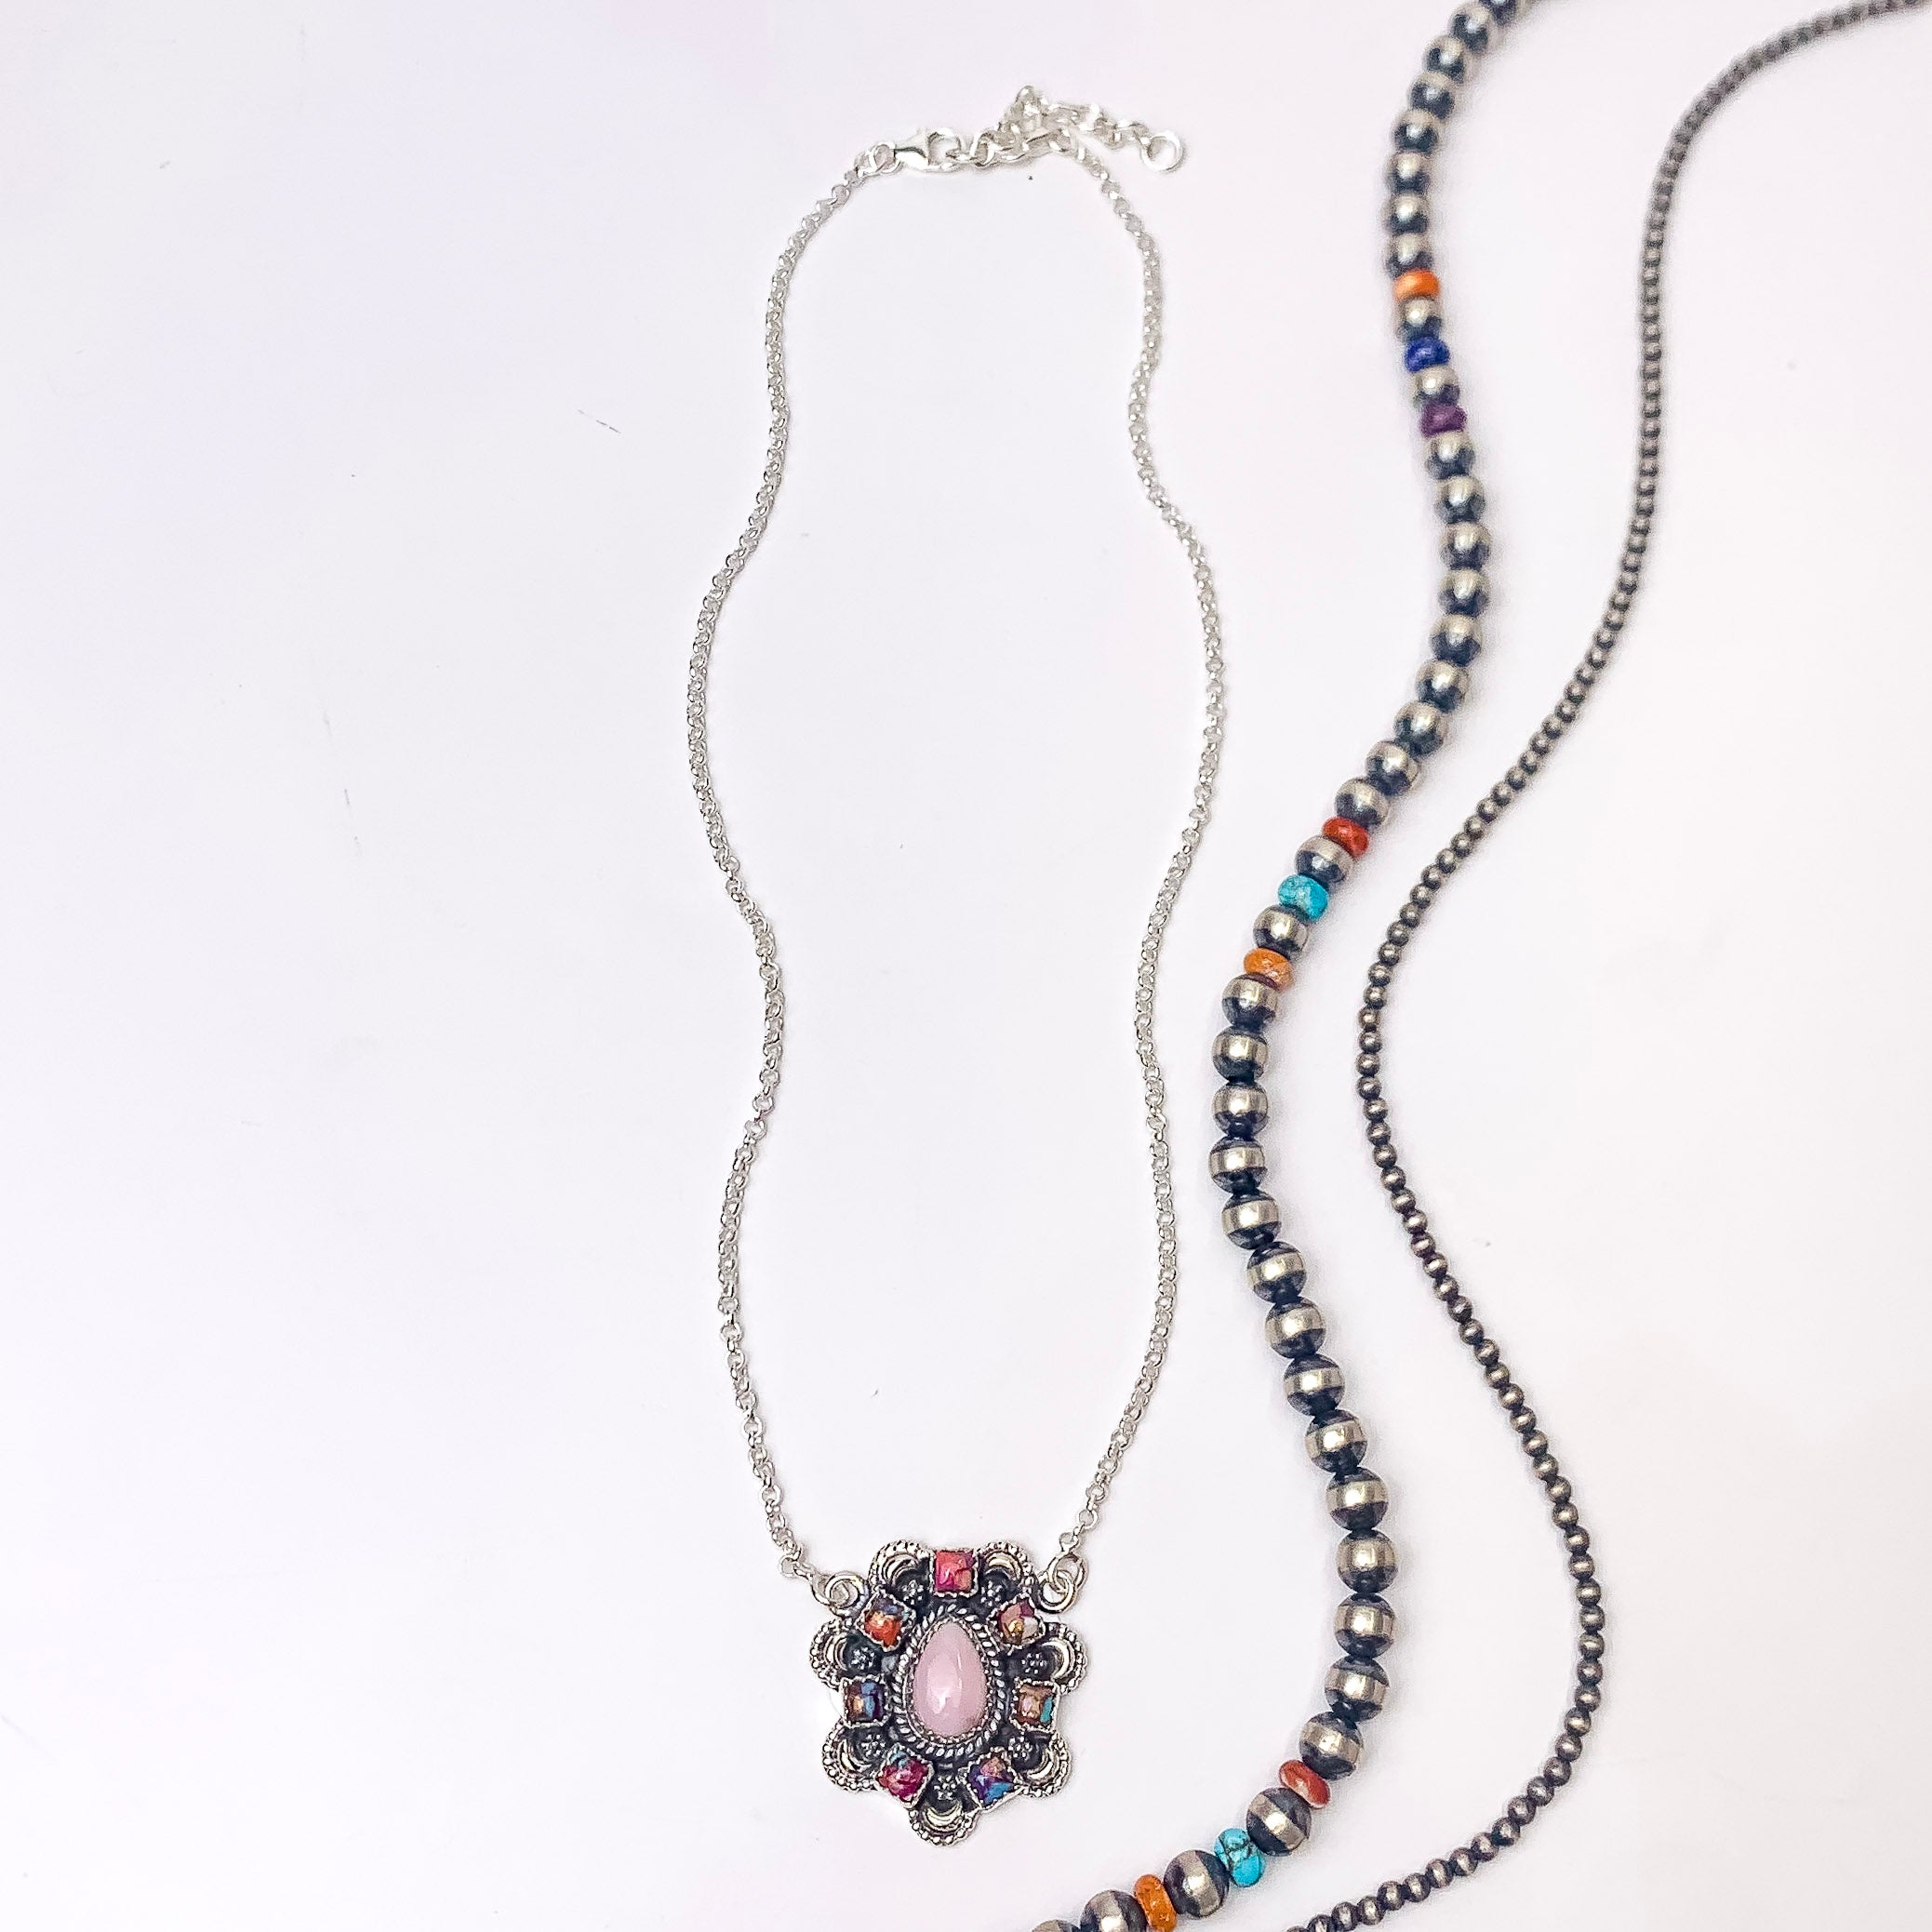 Hada Collection | Handmade Sterling Silver Necklace with Multi Stone Cluster Pendant - Giddy Up Glamour Boutique